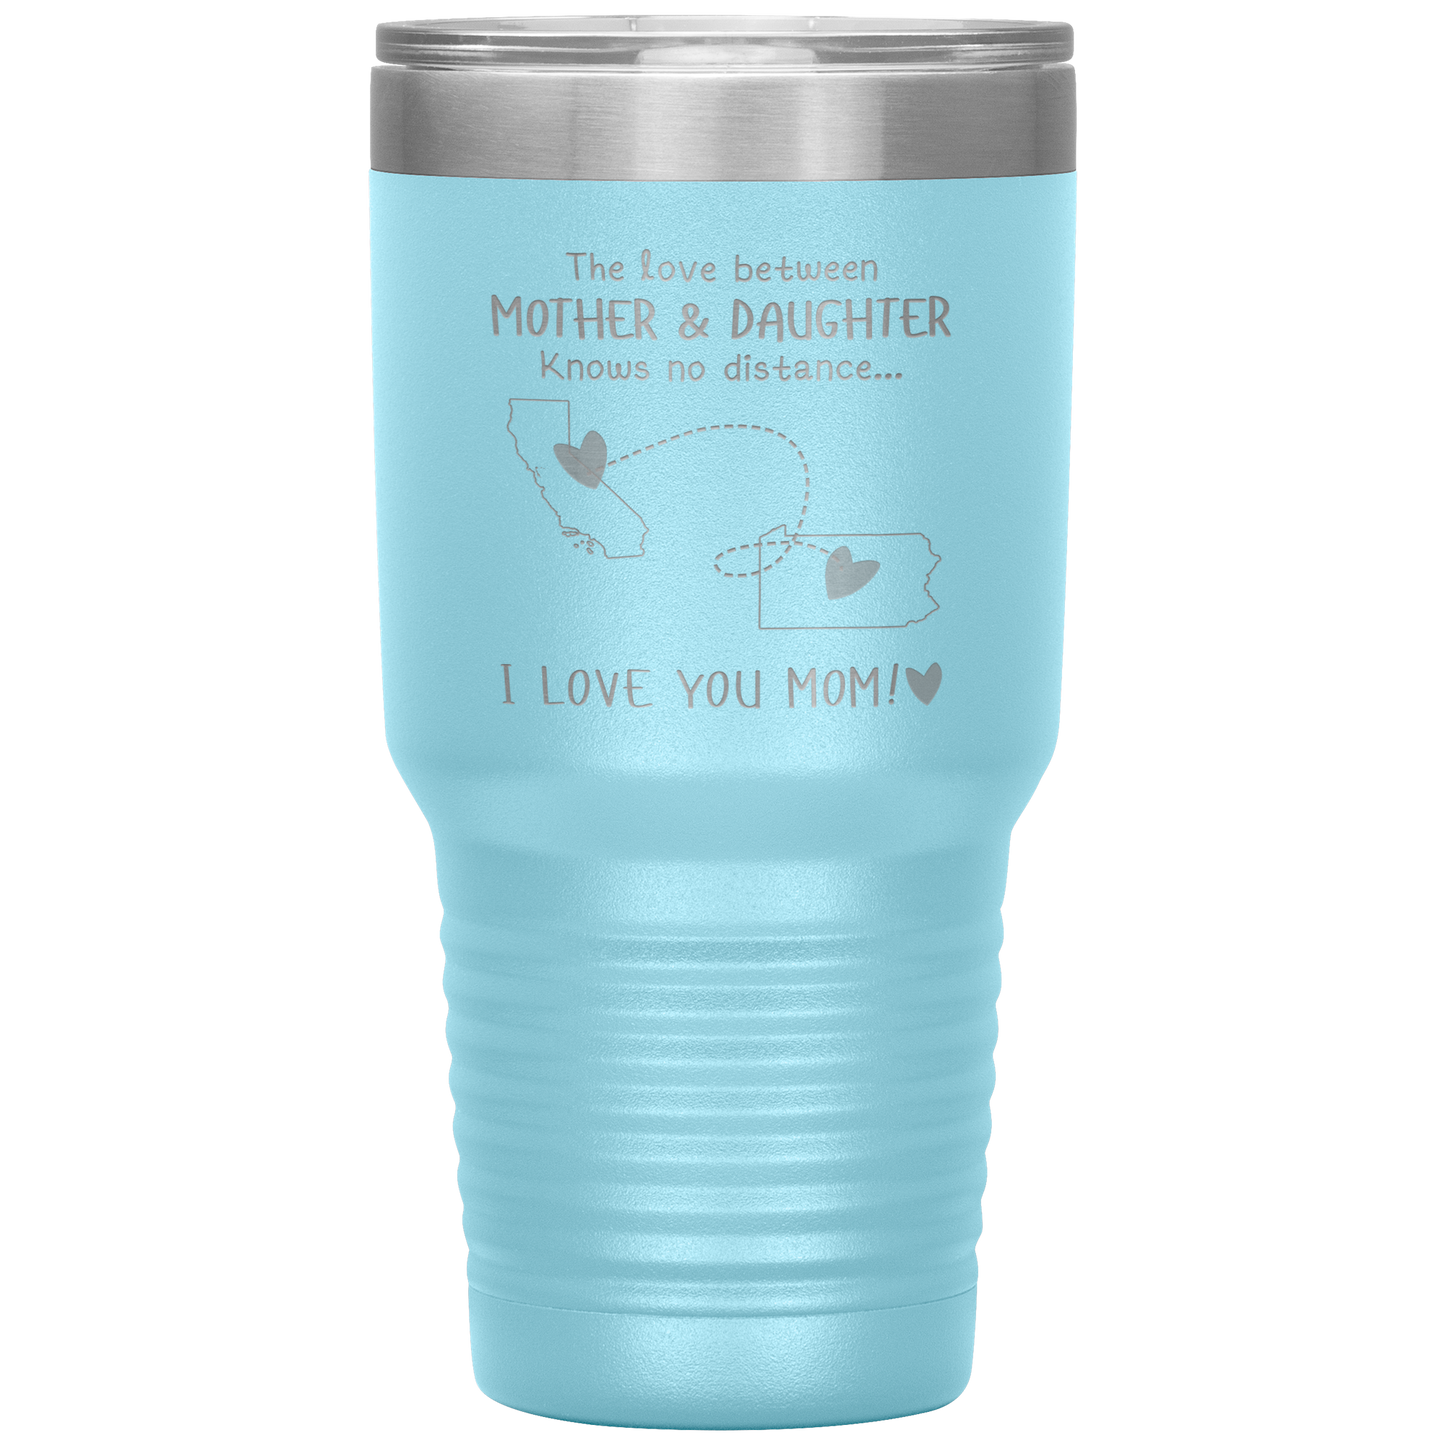 HNV-CUS-GRAND-sp-26141 - [ California | Pennsylvania ] (Tumbler_30oz) Mothers Day Gifts Personalized Mother Day Gifts Coffee Mug F